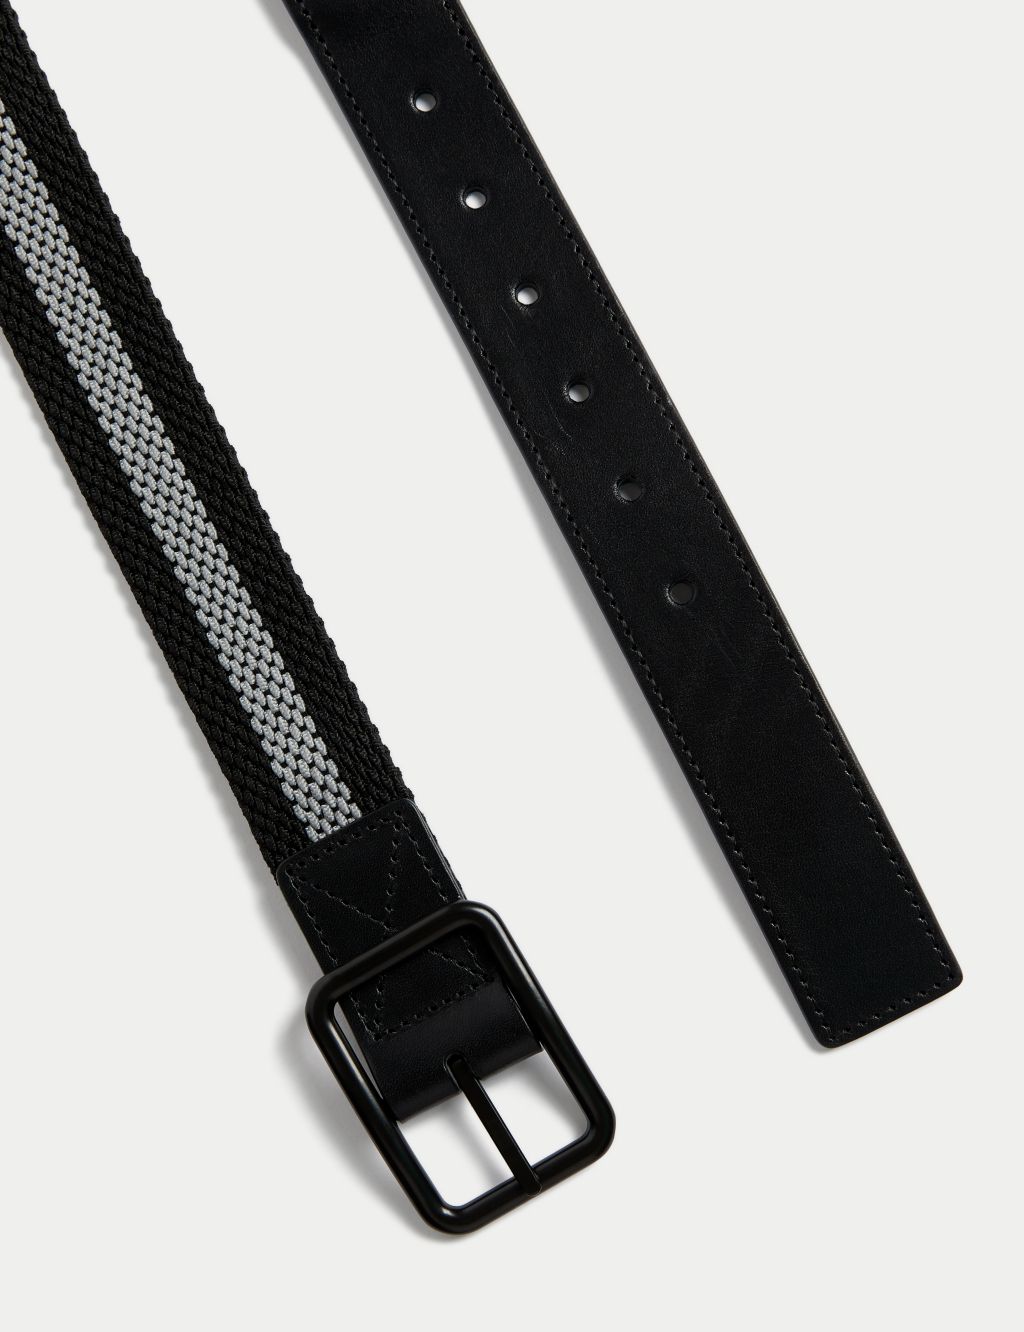 Reversible Textured Belt | M&S Collection | M&S